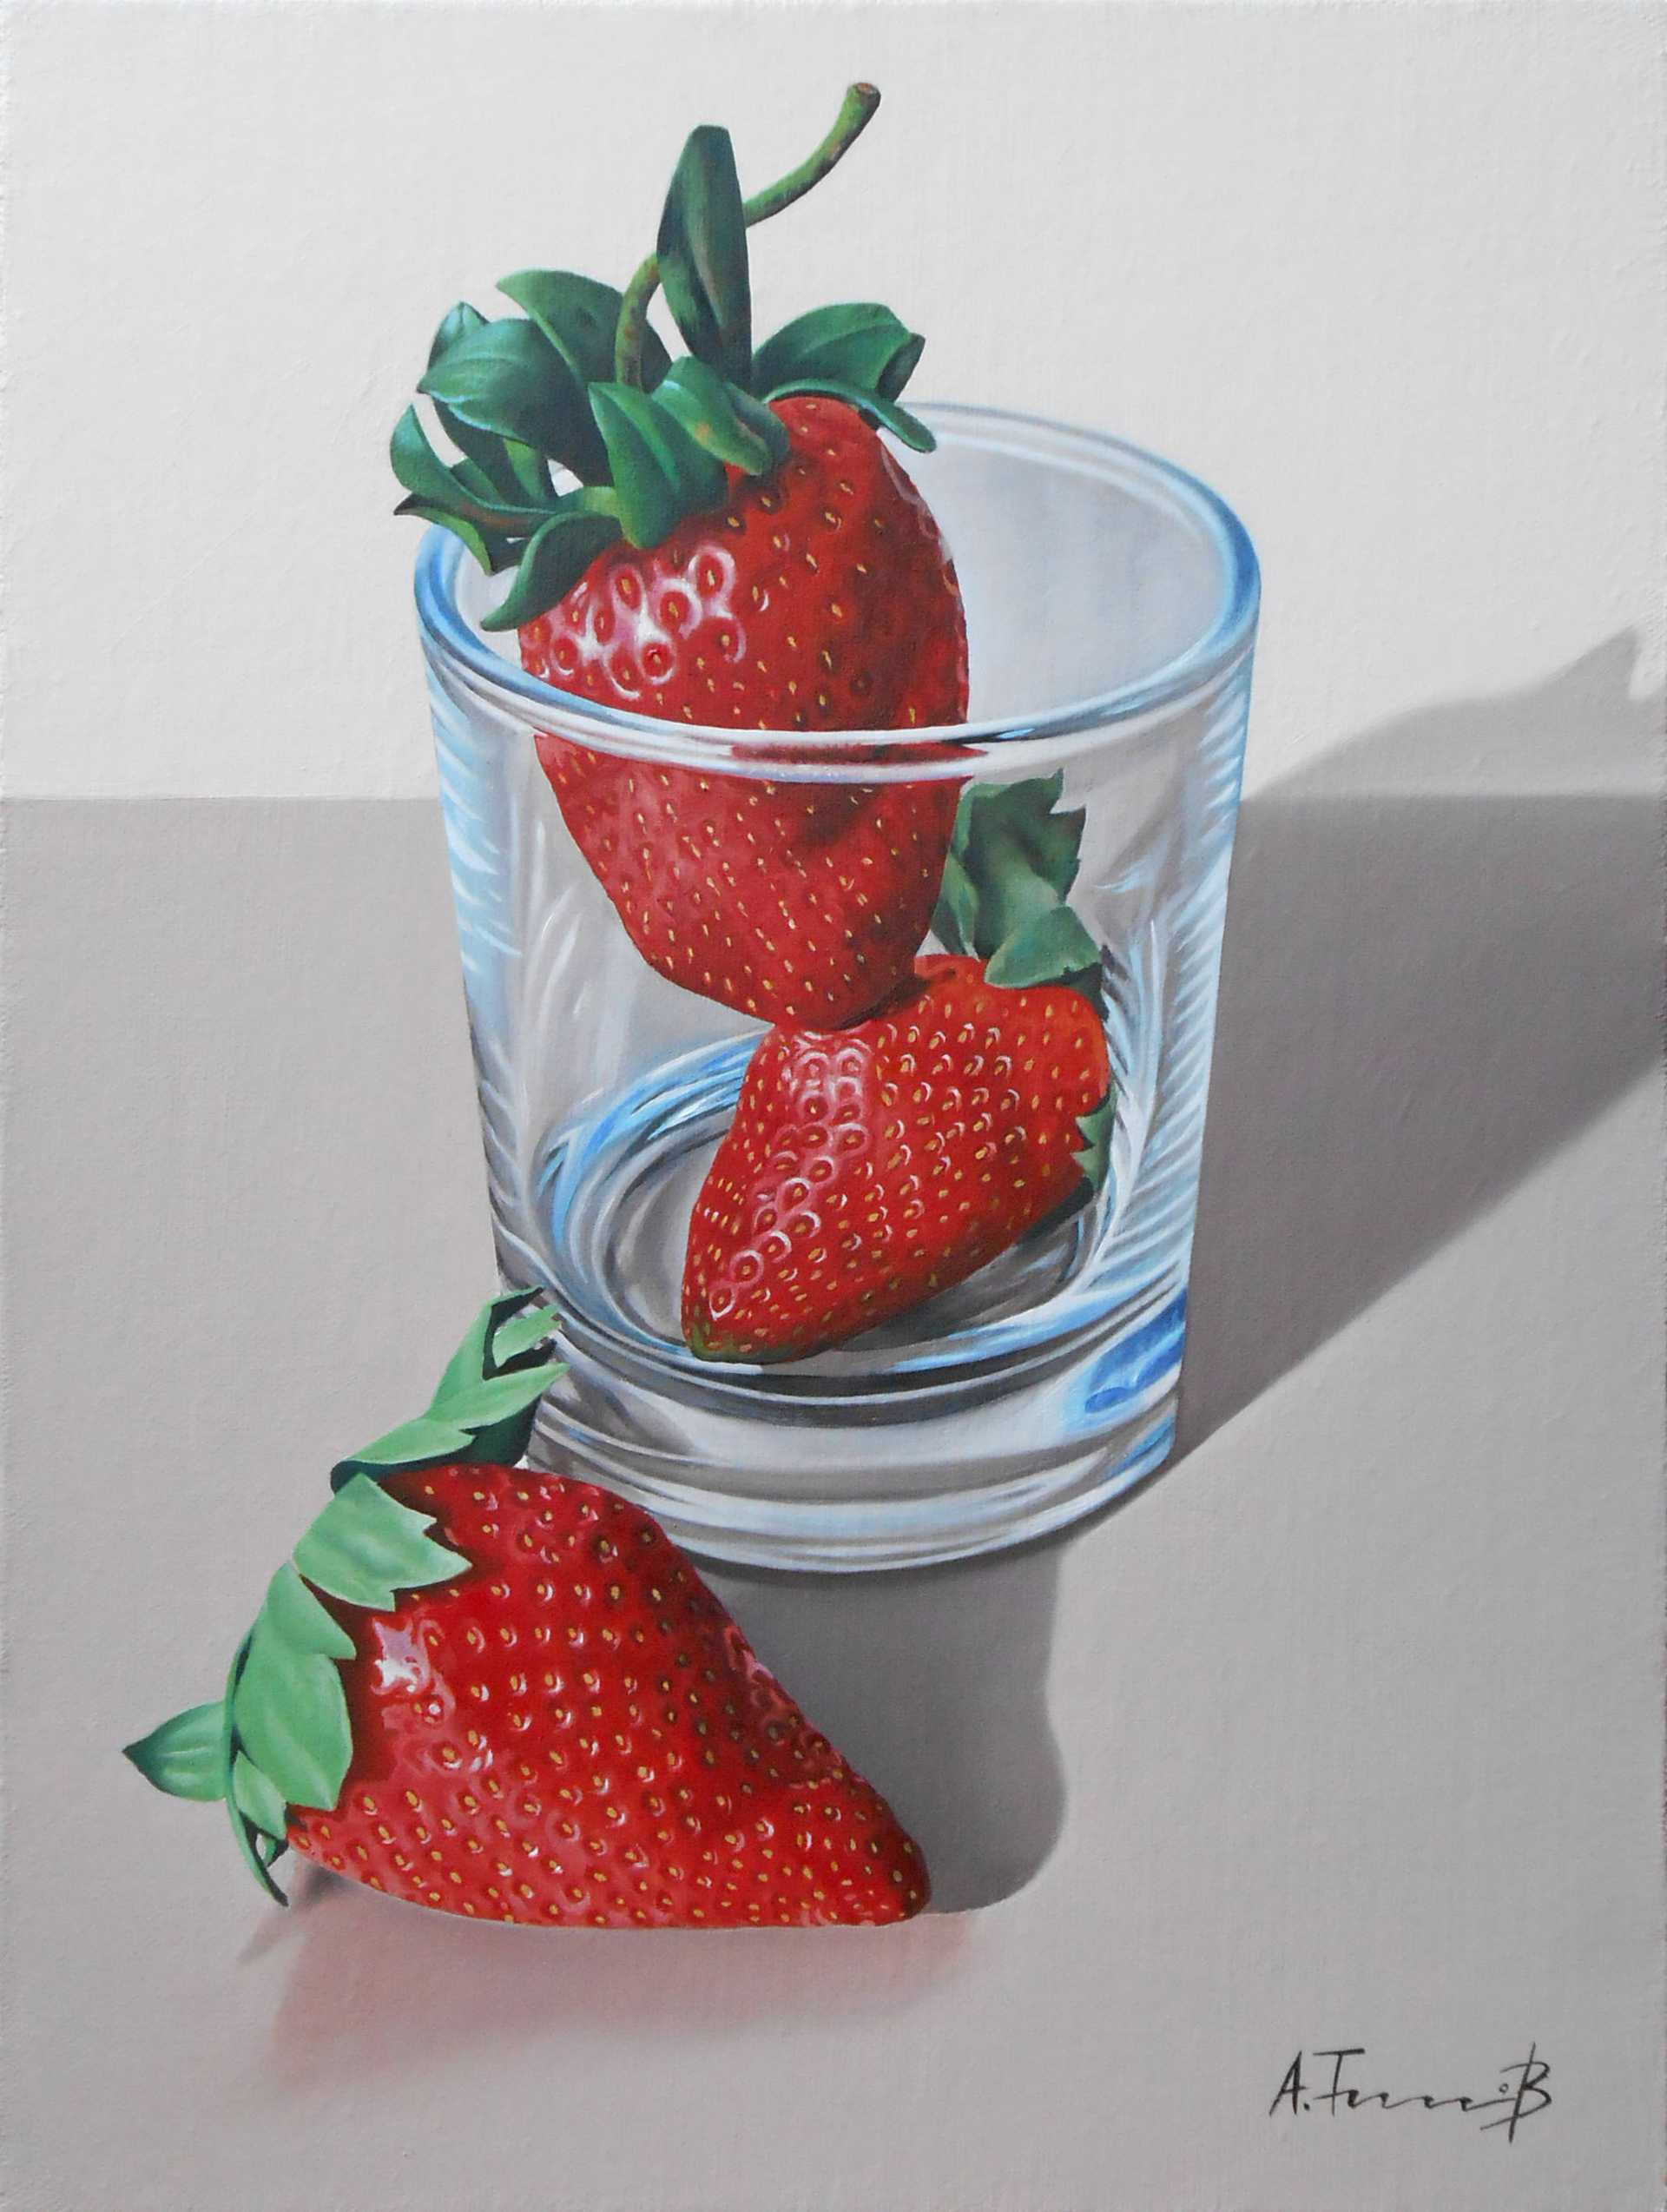 Strawberries in a Glass